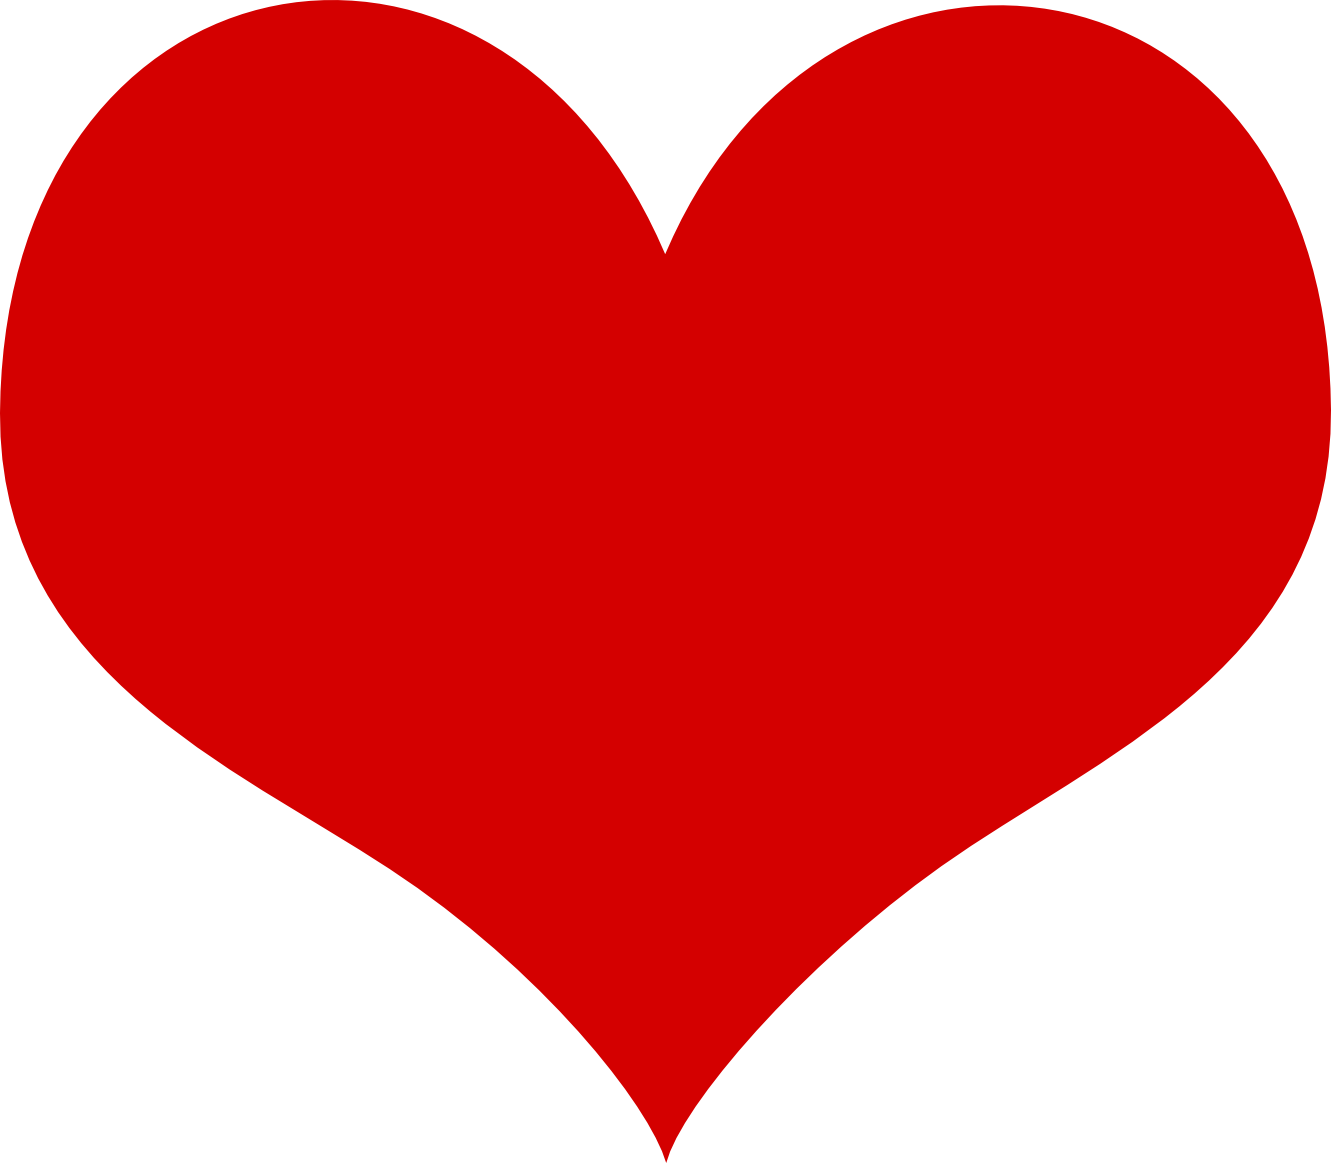 heart PNG706